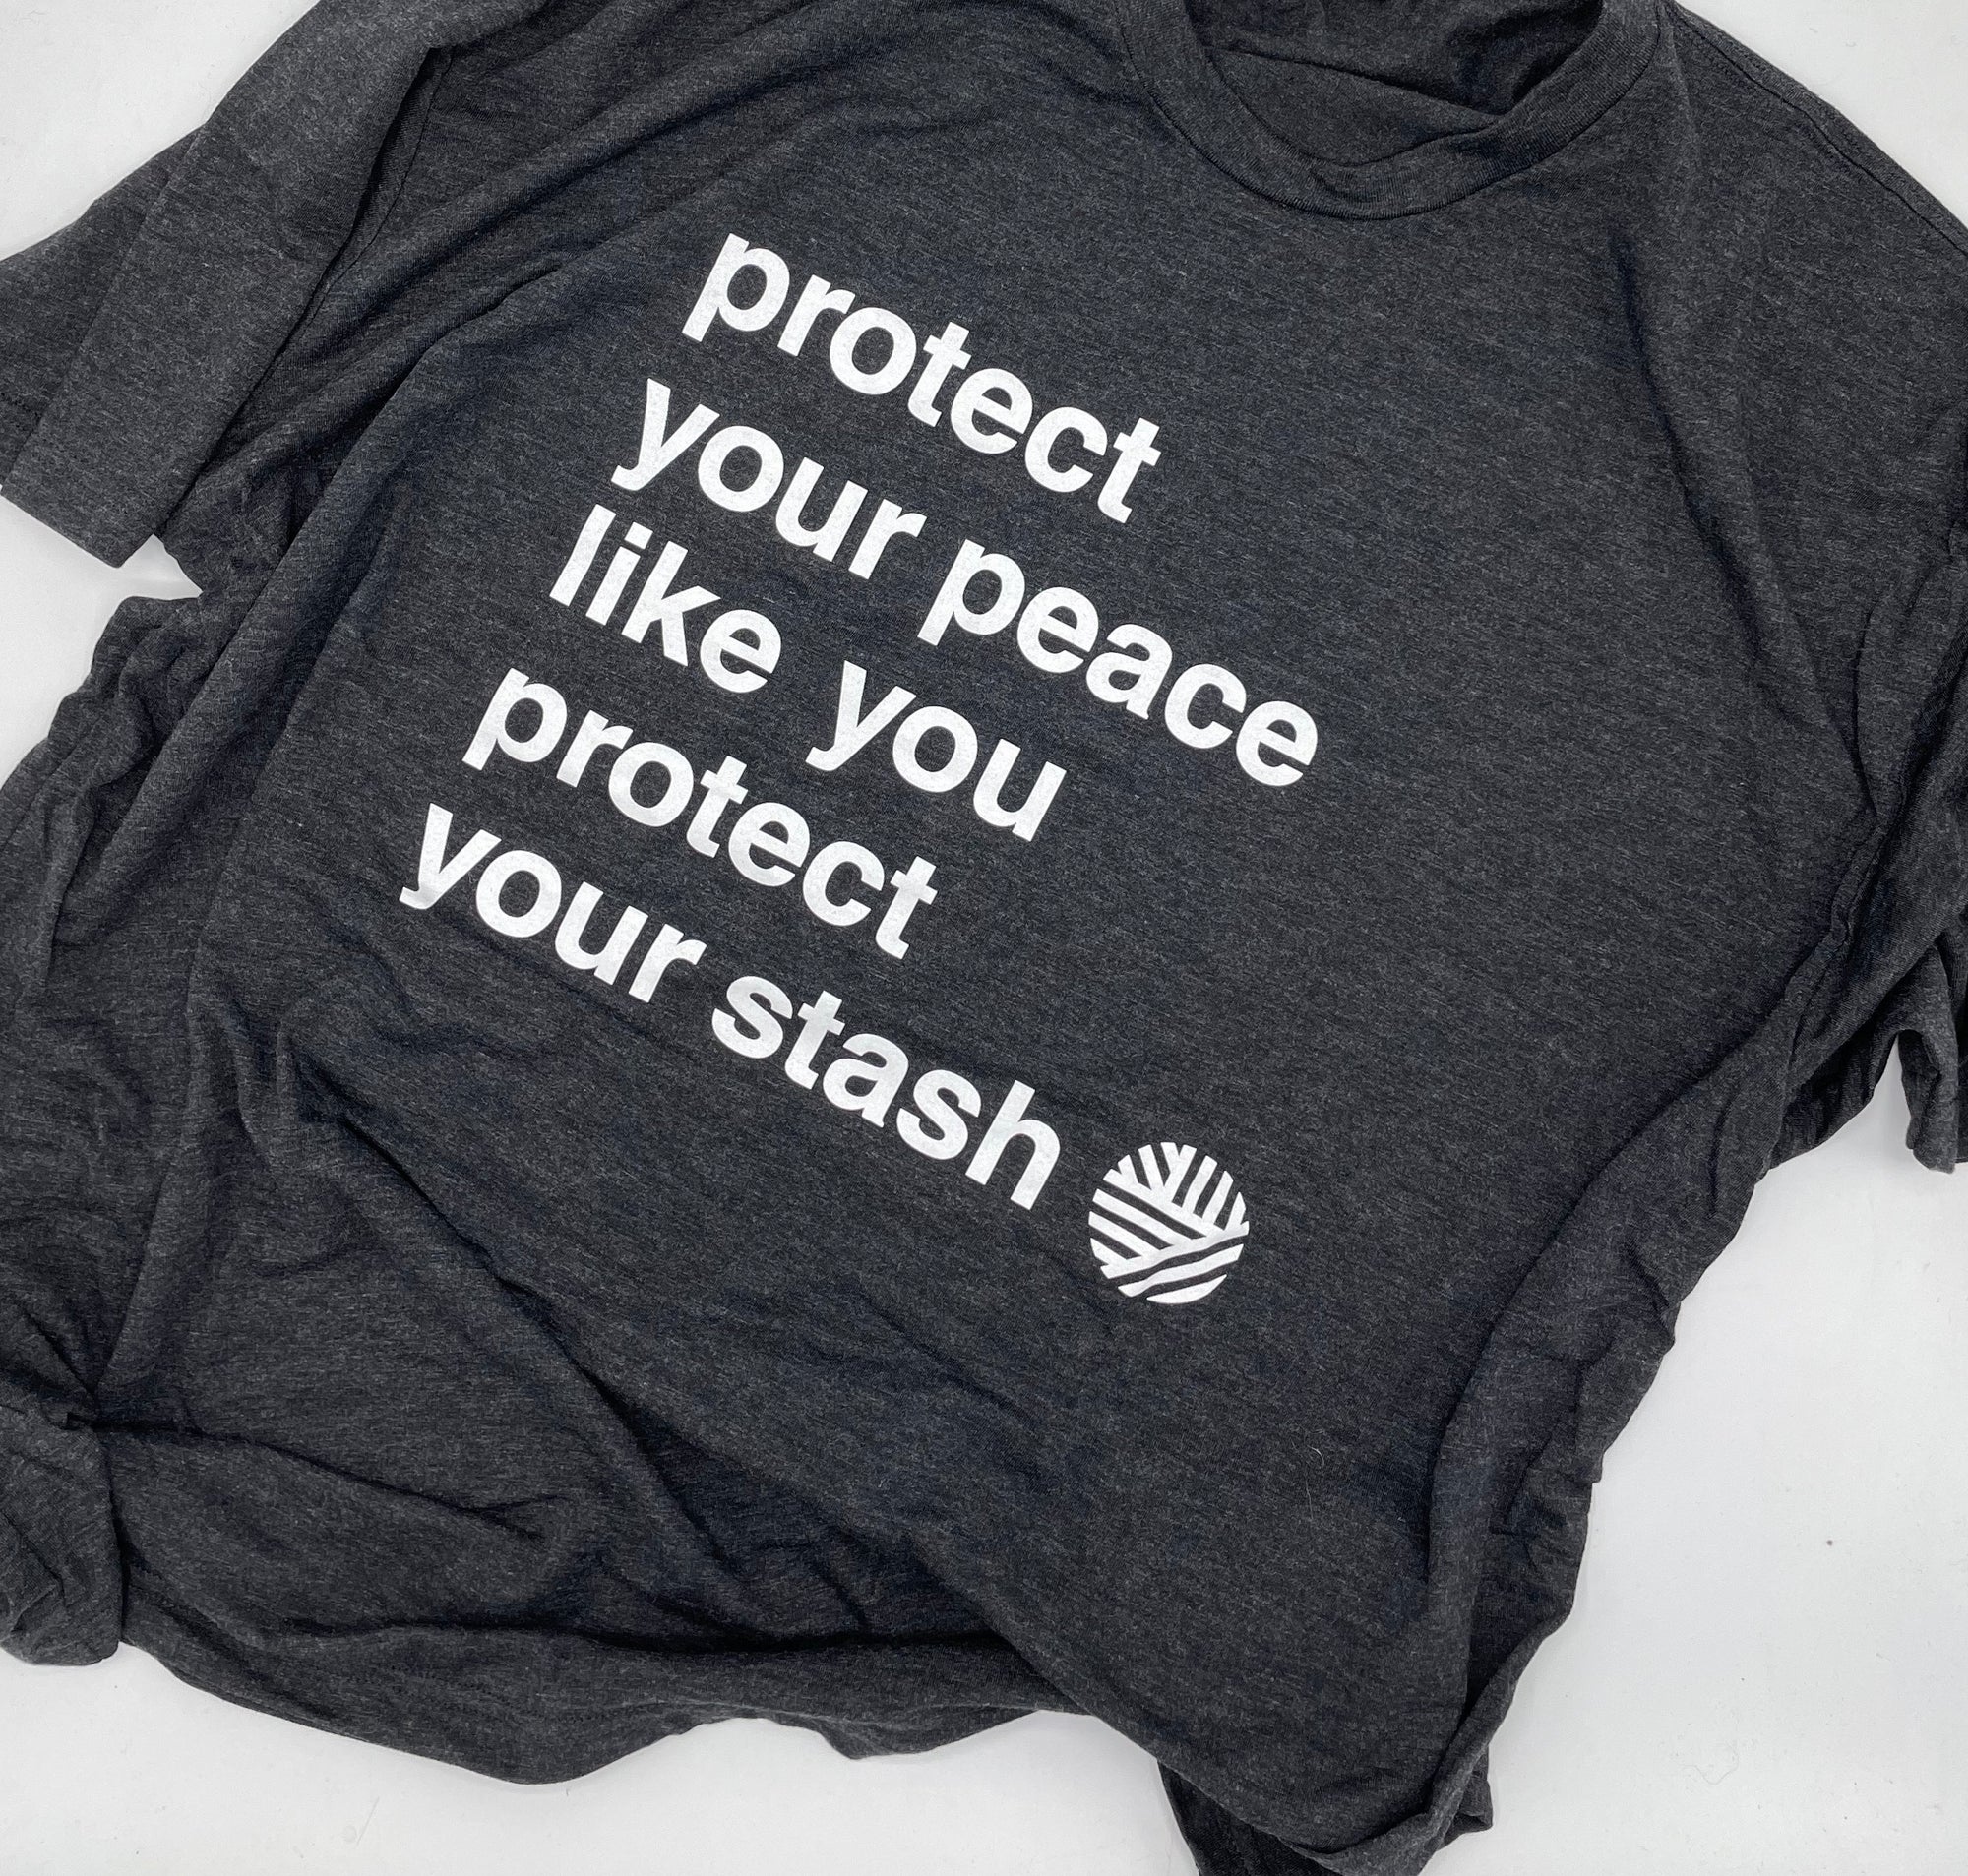 Protect Your Peace T-shirt